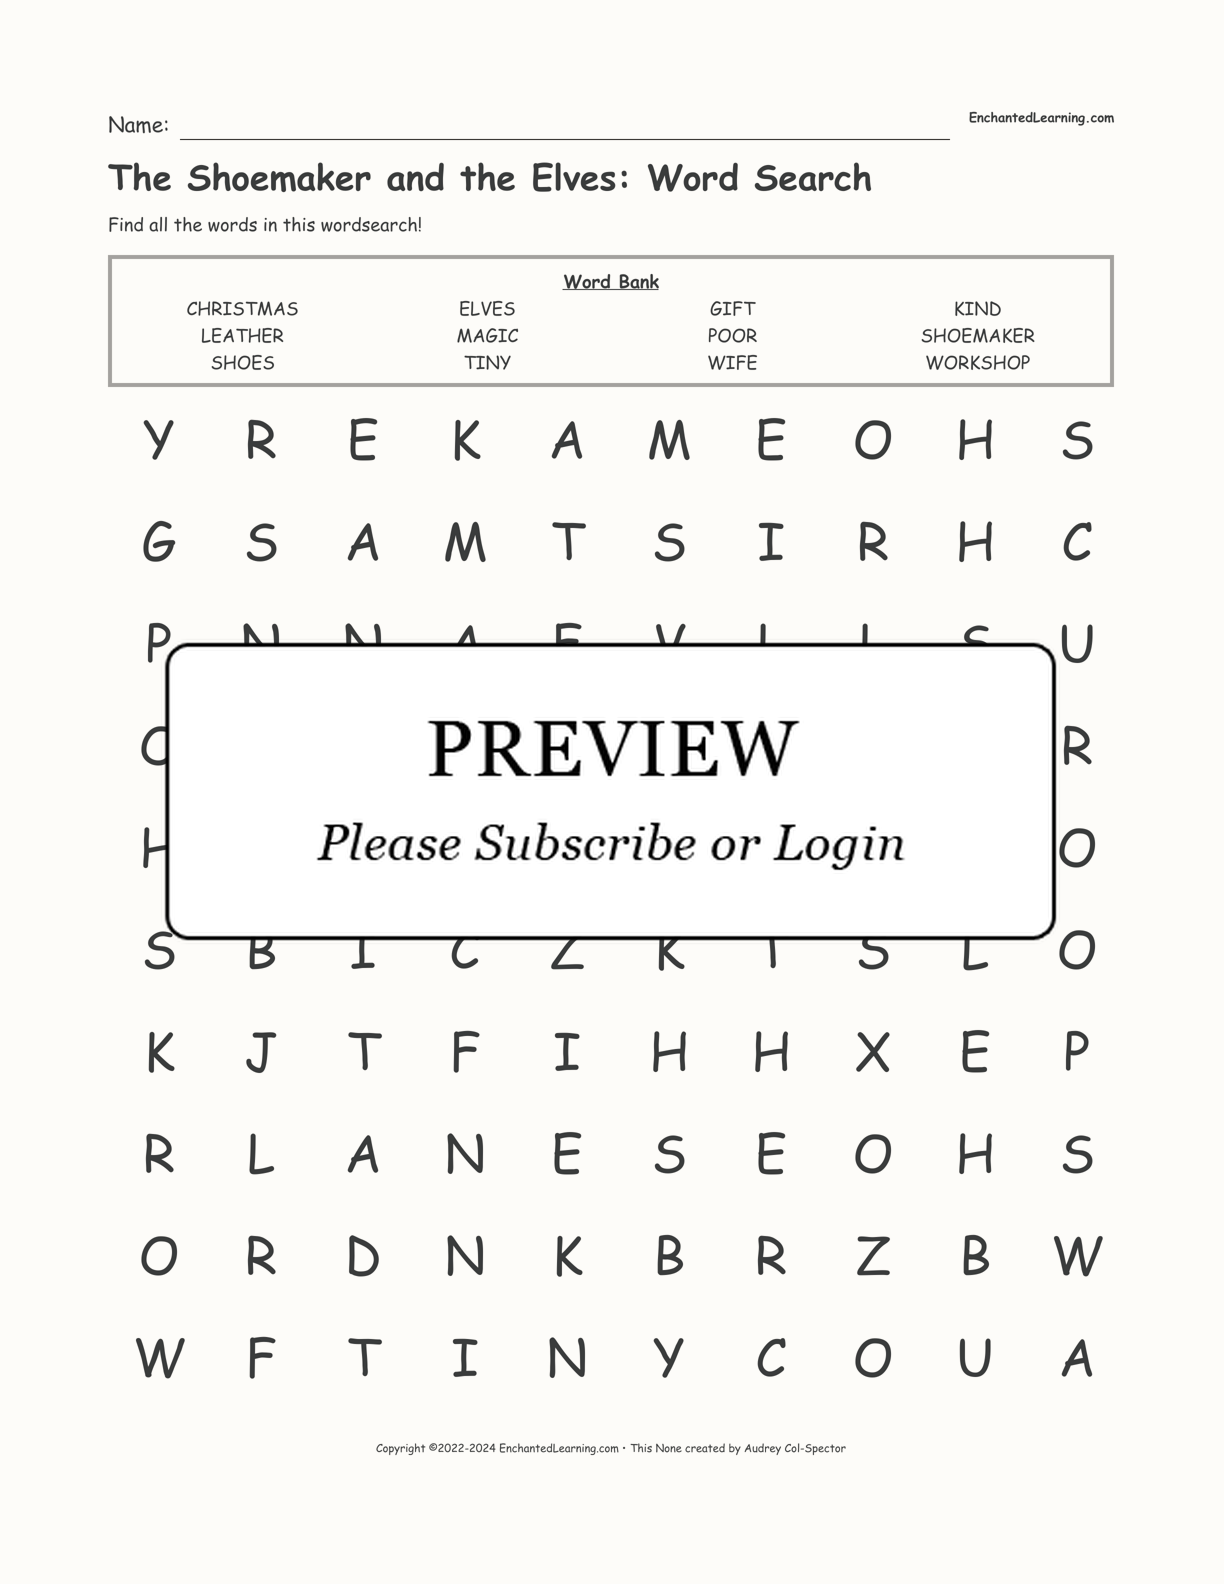 The Shoemaker and the Elves: Word Search interactive worksheet page 1